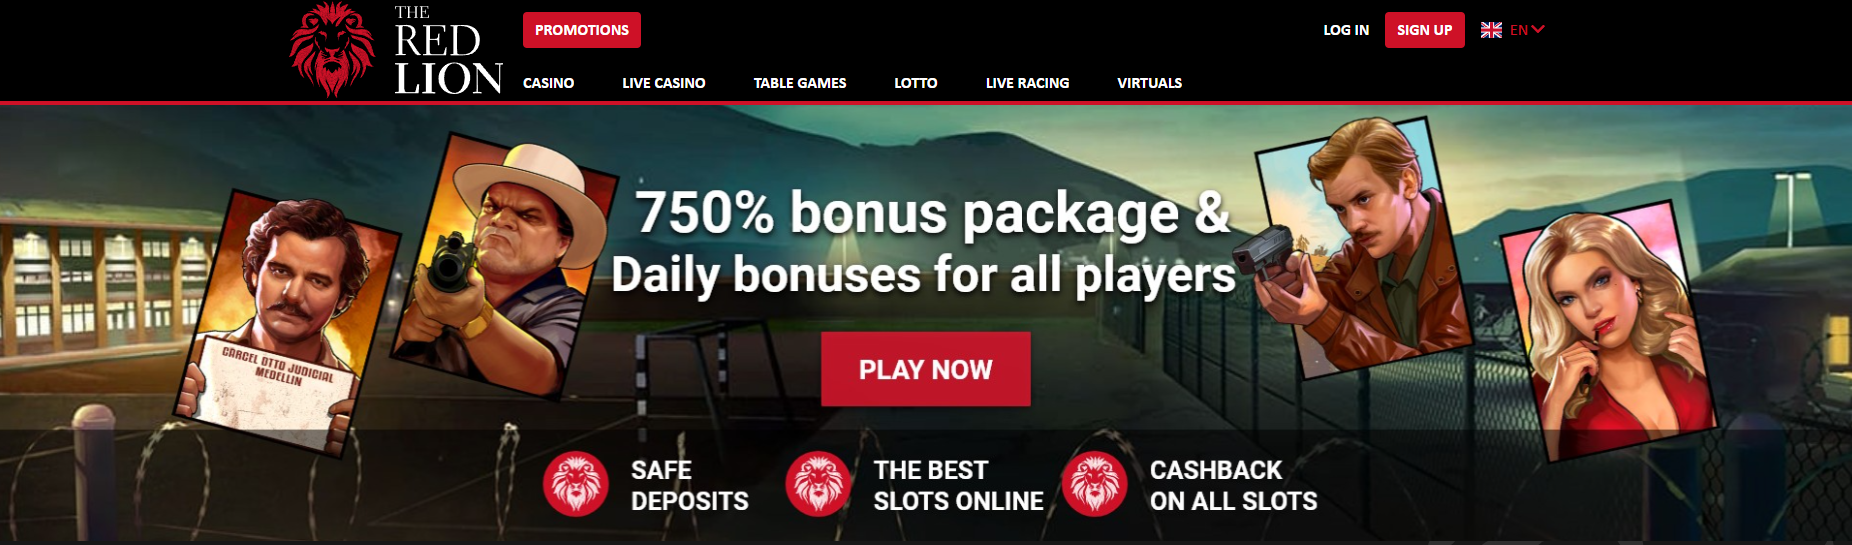 Red Lion Casino Homepage